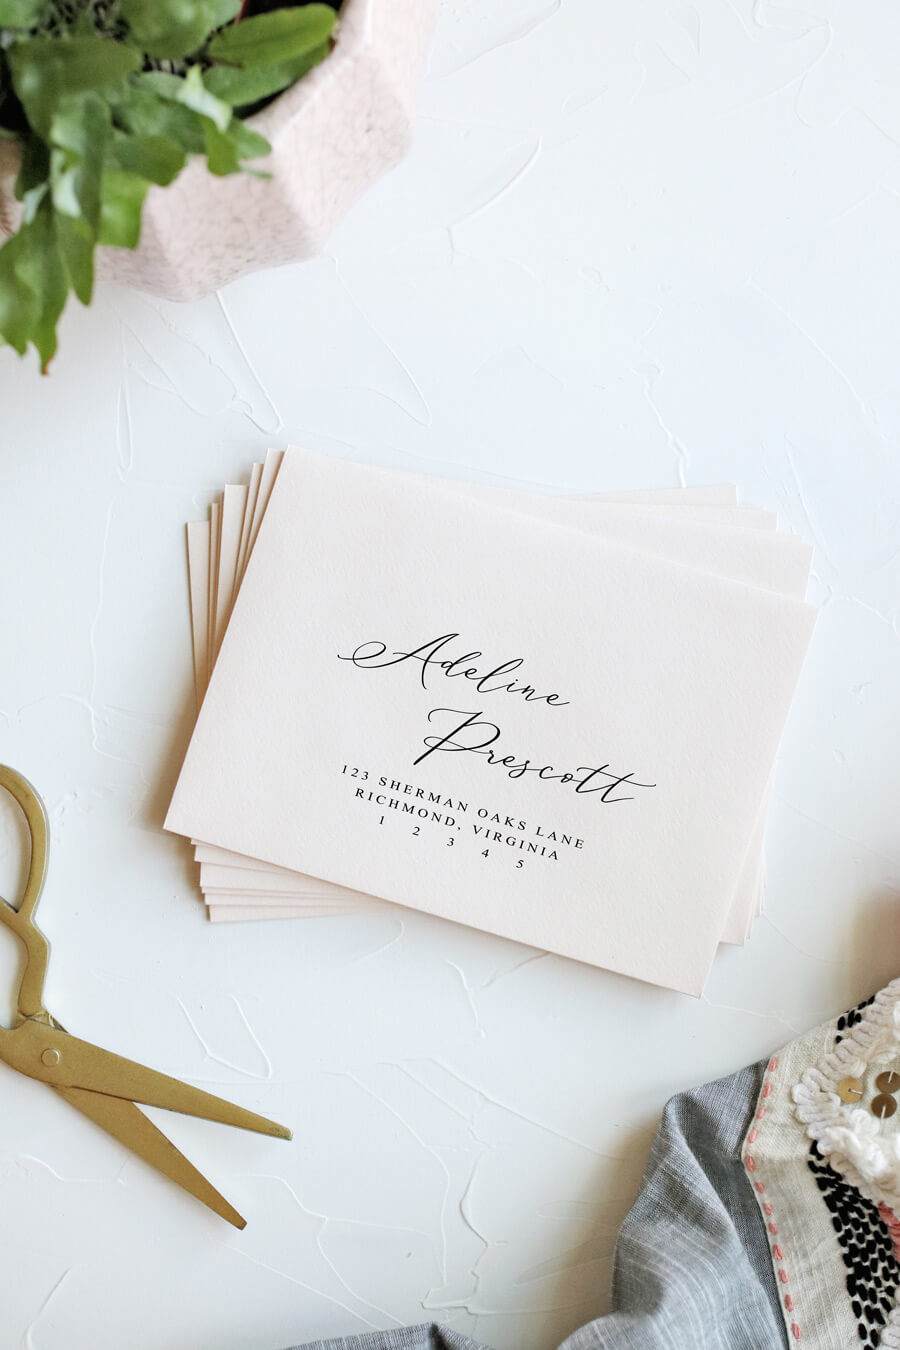 How To Print Envelopes The Easy Way | Pipkin Paper Company Intended For Paper Source Templates Place Cards